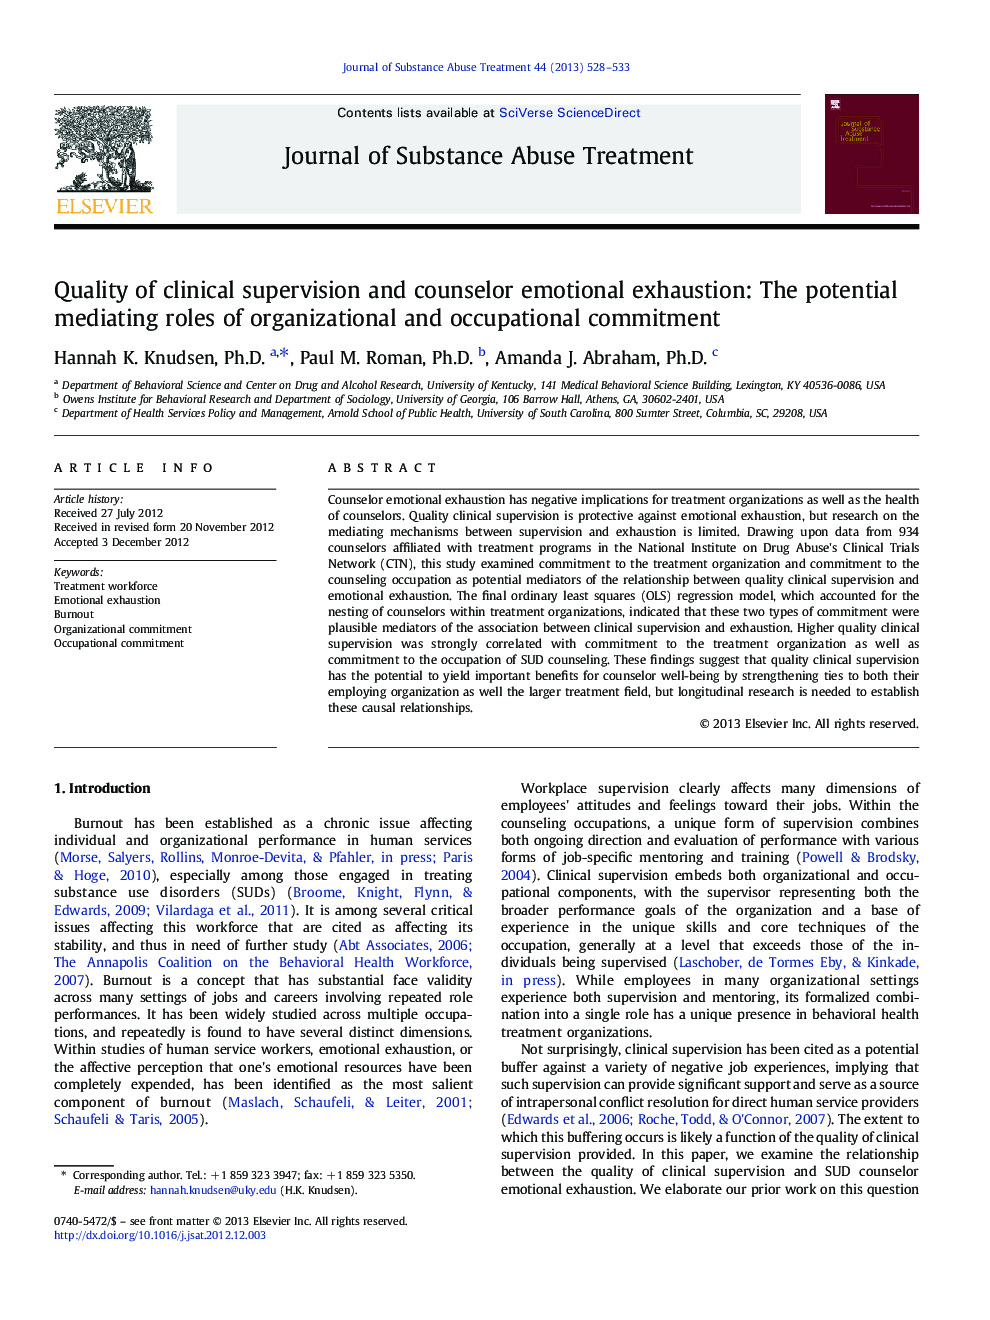 Quality of clinical supervision and counselor emotional exhaustion: The potential mediating roles of organizational and occupational commitment